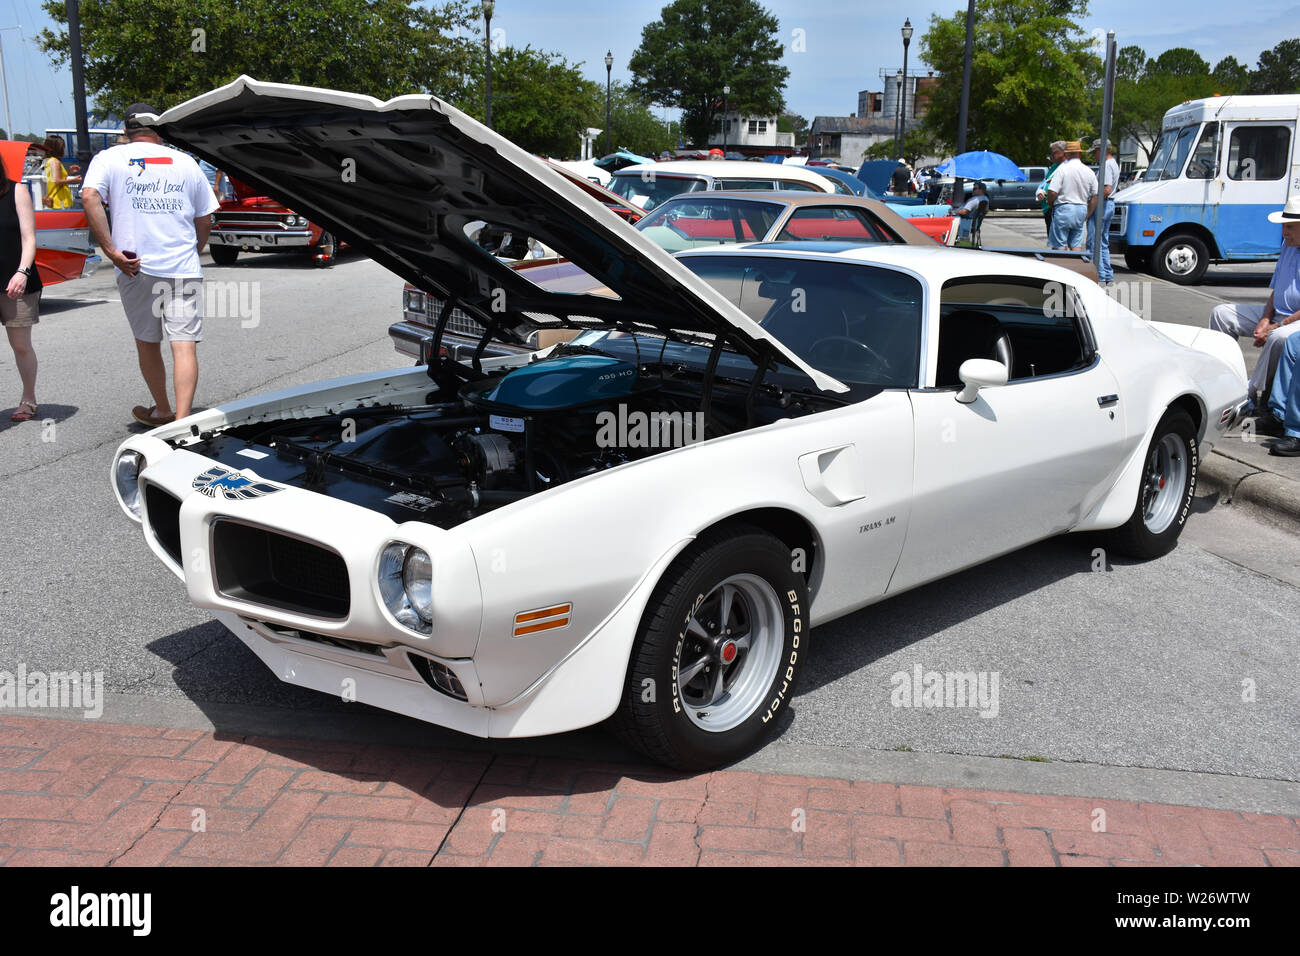 A Pontiac Trans Am with 455 engine on display at a car show. Stock Photo